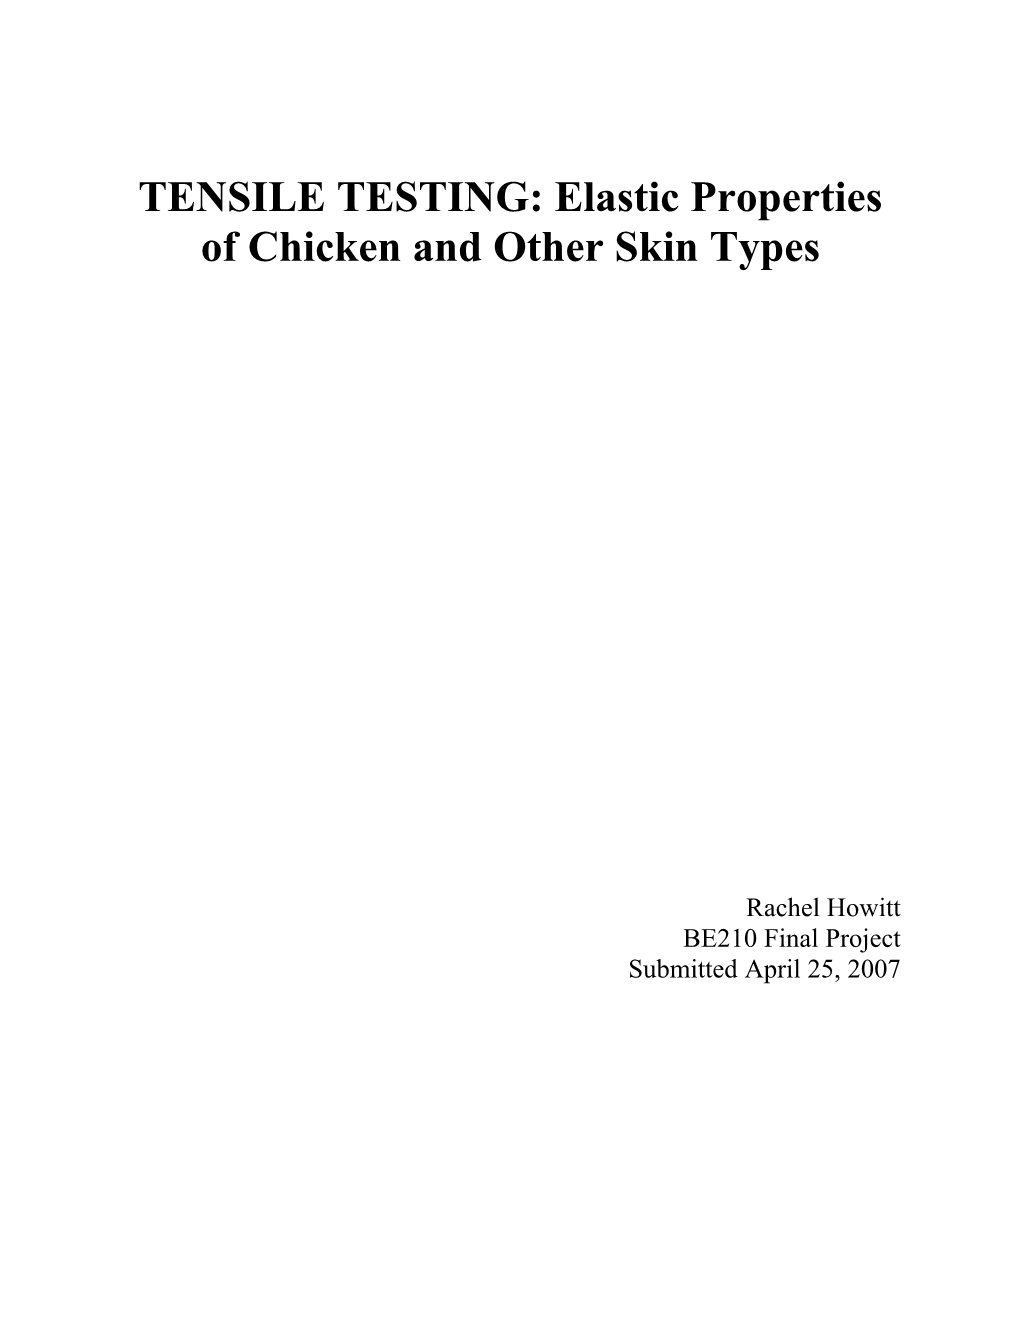 TENSILE TESTING: Elastic Properties of Chicken and Other Skin Types